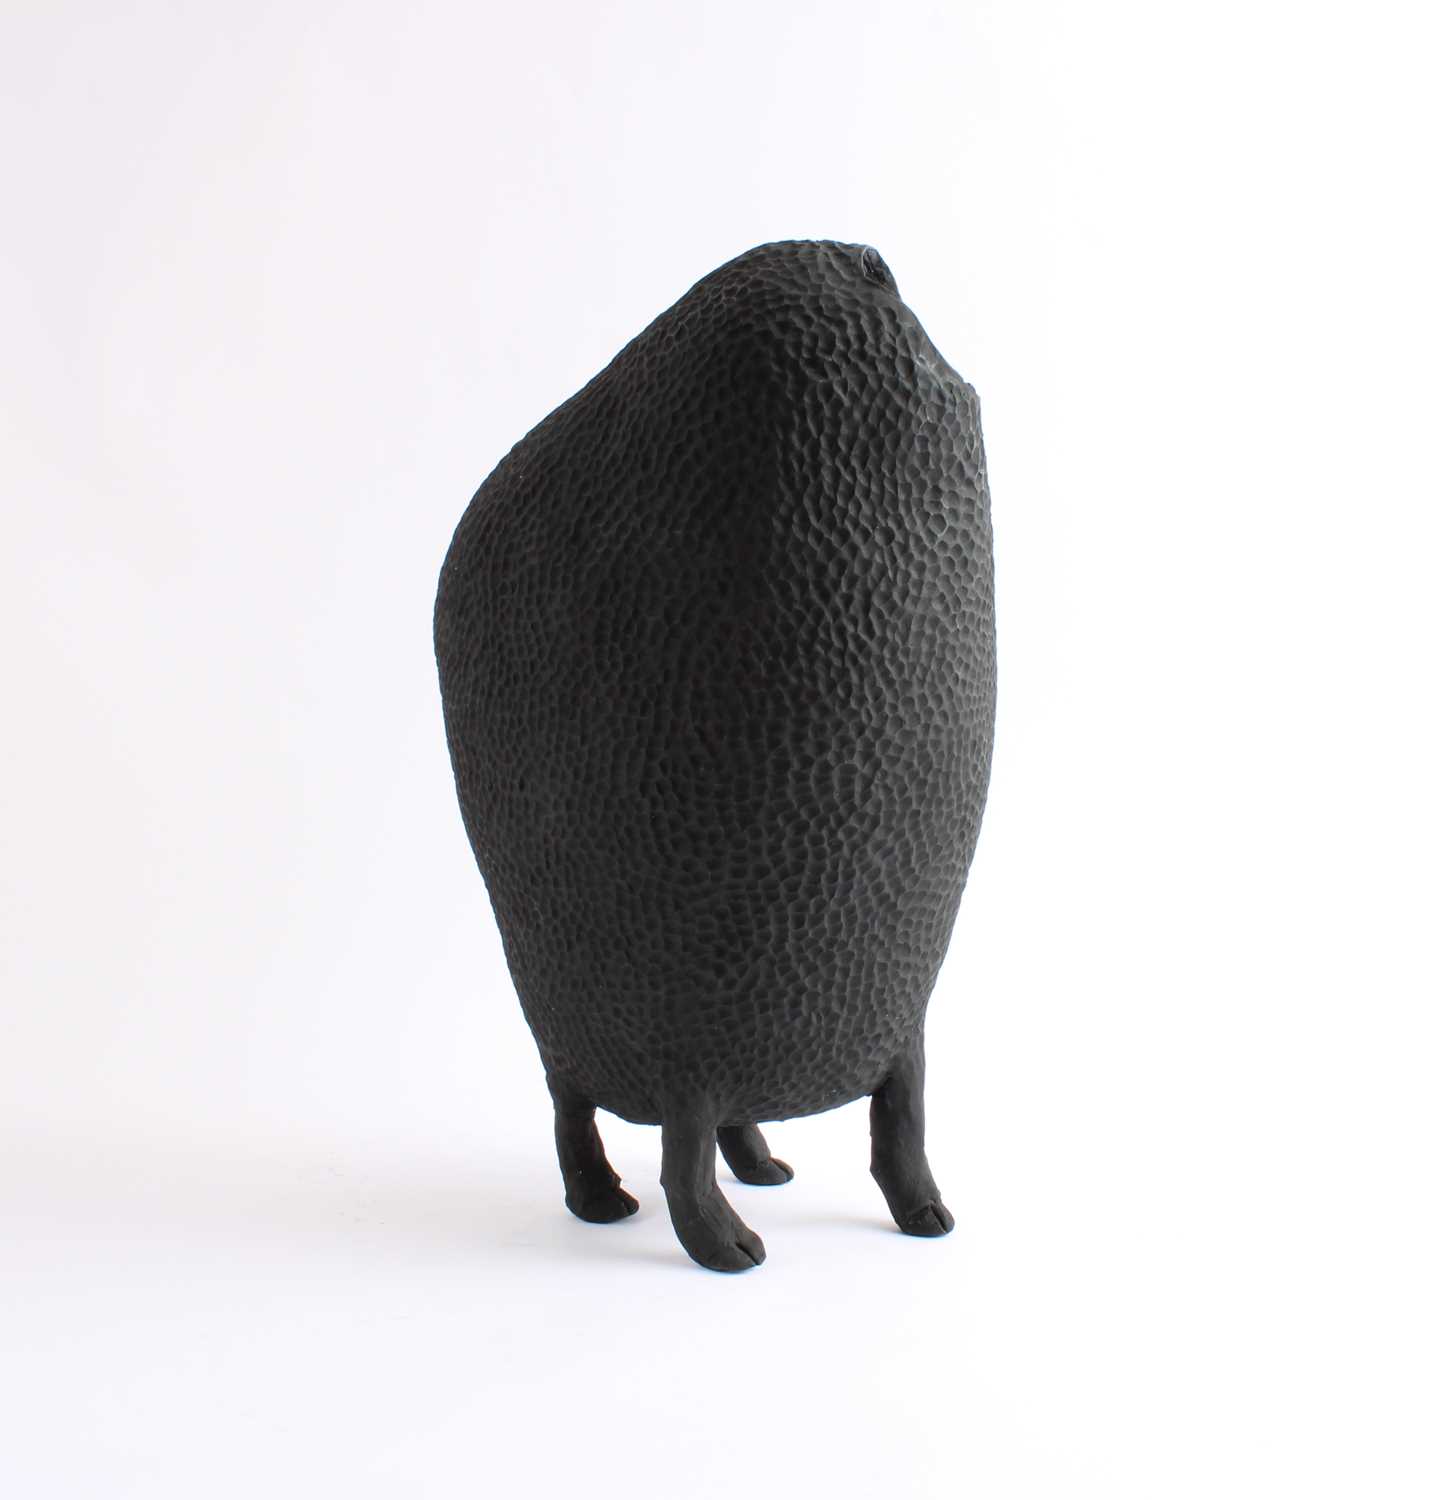 Ana Silva (Guatemala 1982-) Footed Vessel, From the Series "Tzukxul III" ("Sheep" in Q`eqchí) - Image 3 of 5